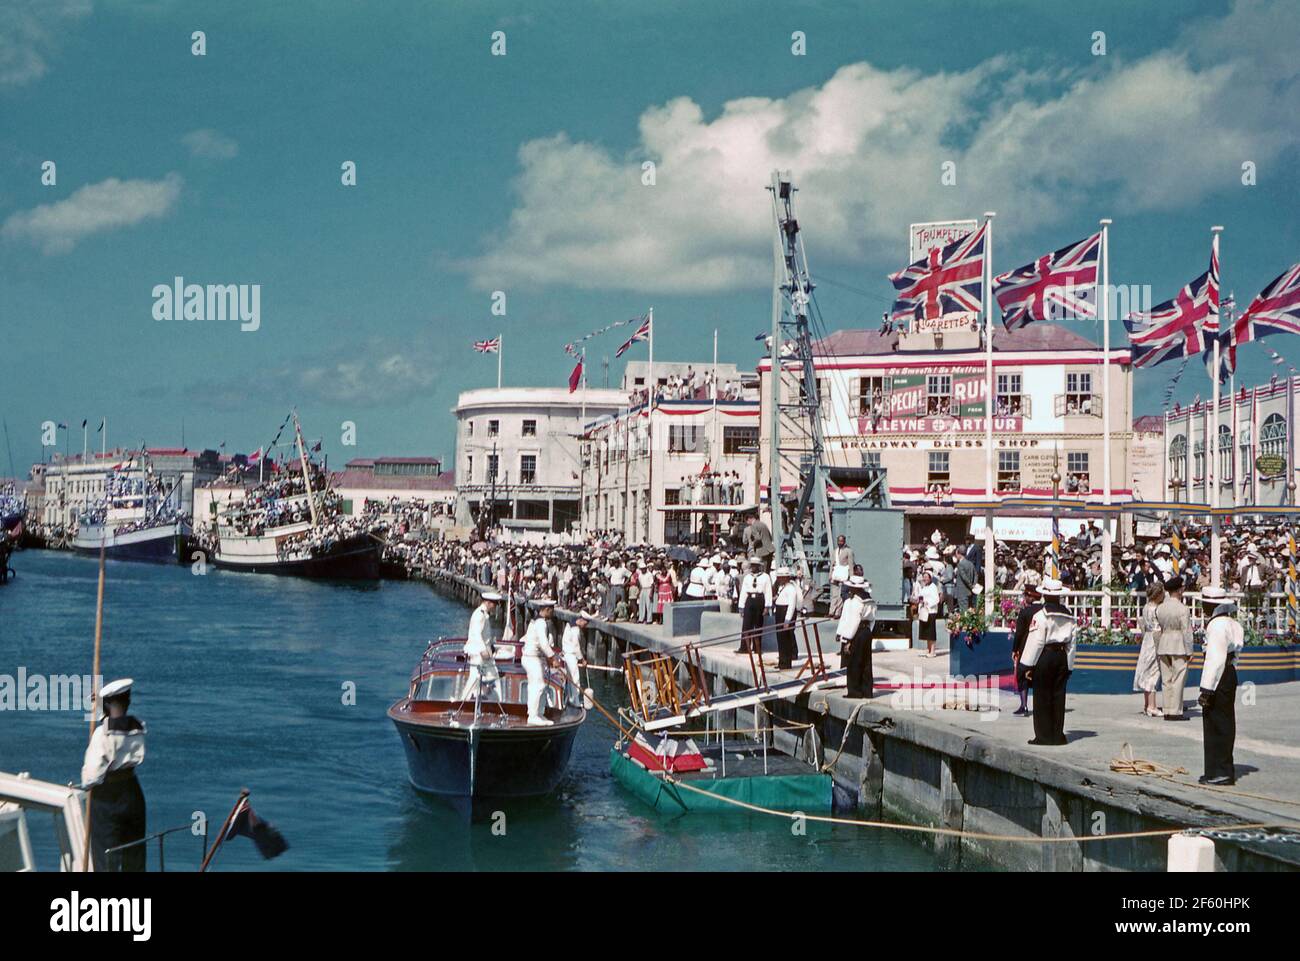 Crowd scenes in Bridgetown, Barbados, 1955, during Princess Margaret’s Caribbean tour. Here crowds line the harbour at Trafalgar Square (now called National Heroes Square). Here a tender from the moored Royal Yacht ‘Britannia’ is arriving. In January 1955, the Princess made her first trips to the Caribbean, her tour aboard Britannia to the British colonies was popular throughout the West Indies. Princess Margaret, (1930 – 2002) was the sister of Queen Elizabeth II. This image is from an old amateur 35mm colour transparency – a vintage 1950s photograph. Stock Photo